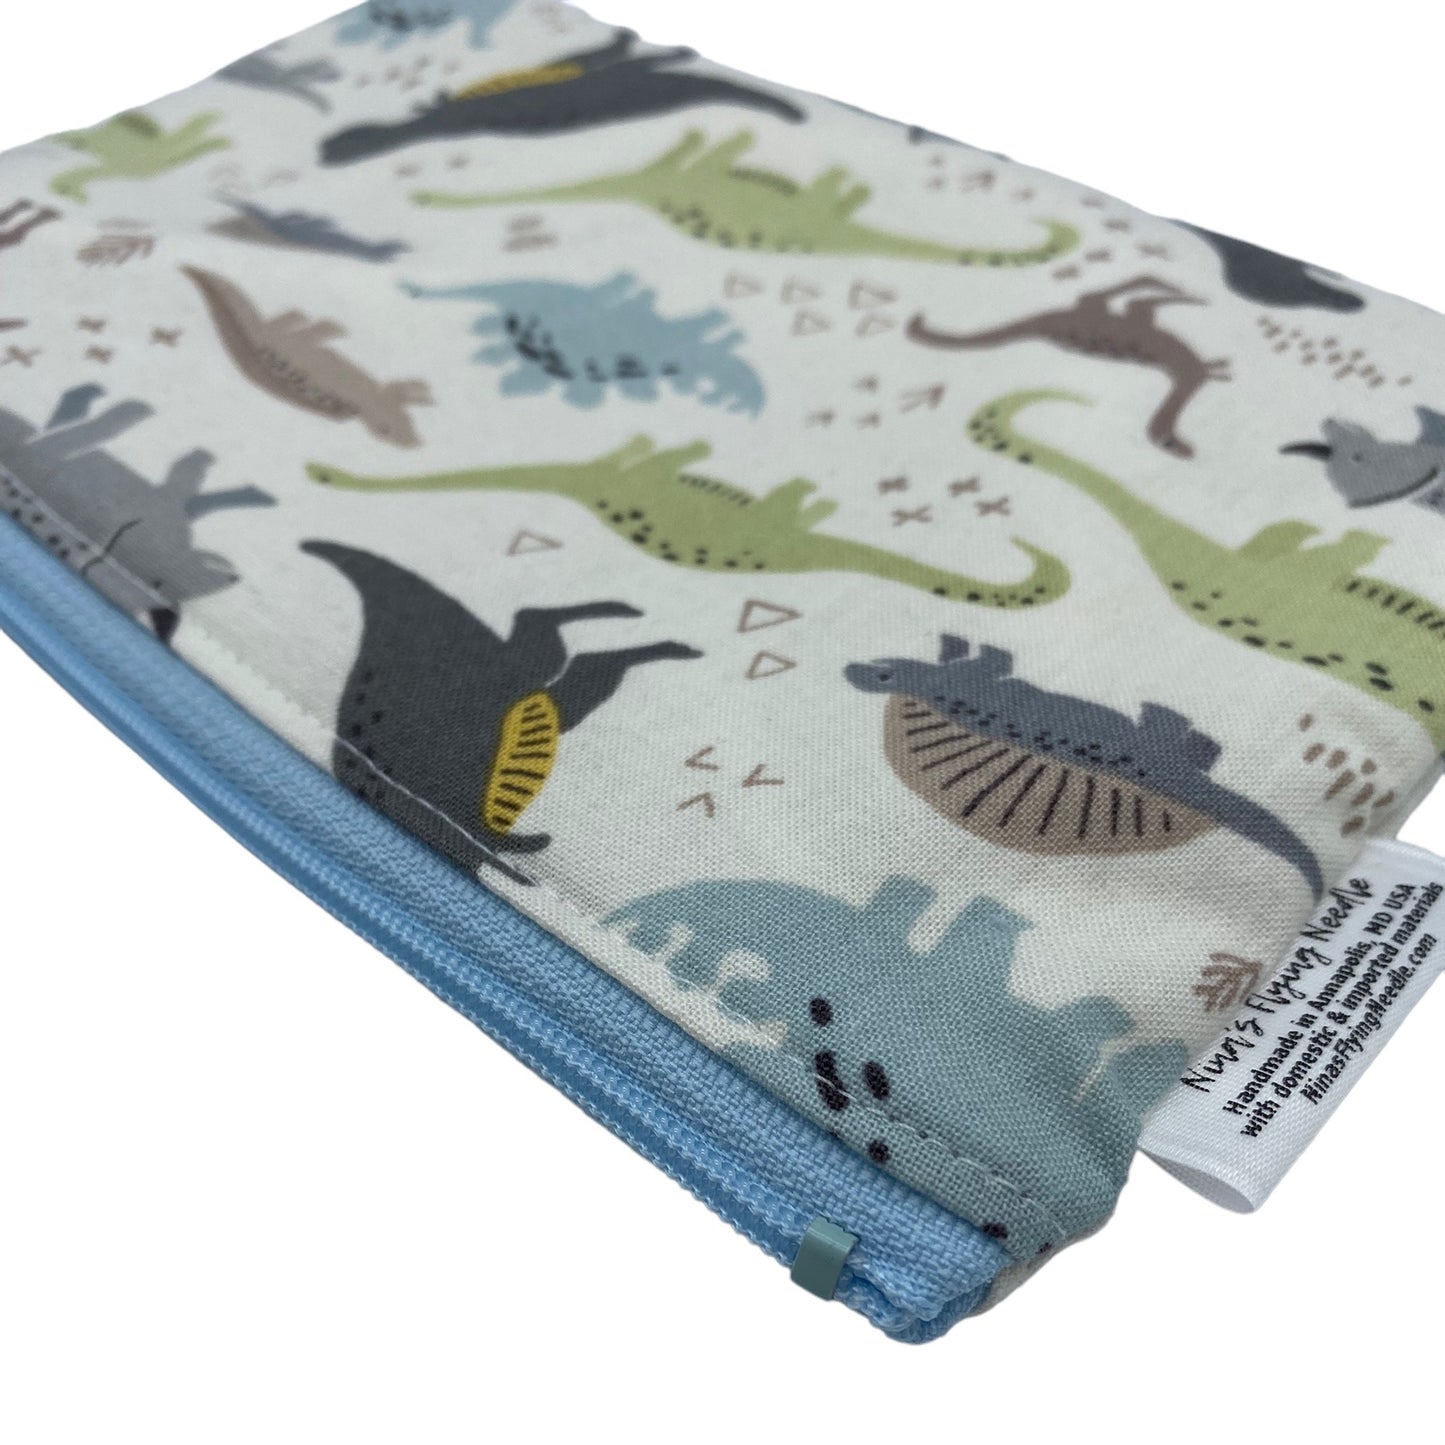 Snack Sized Reusable Zippered Bag Dinosaurs